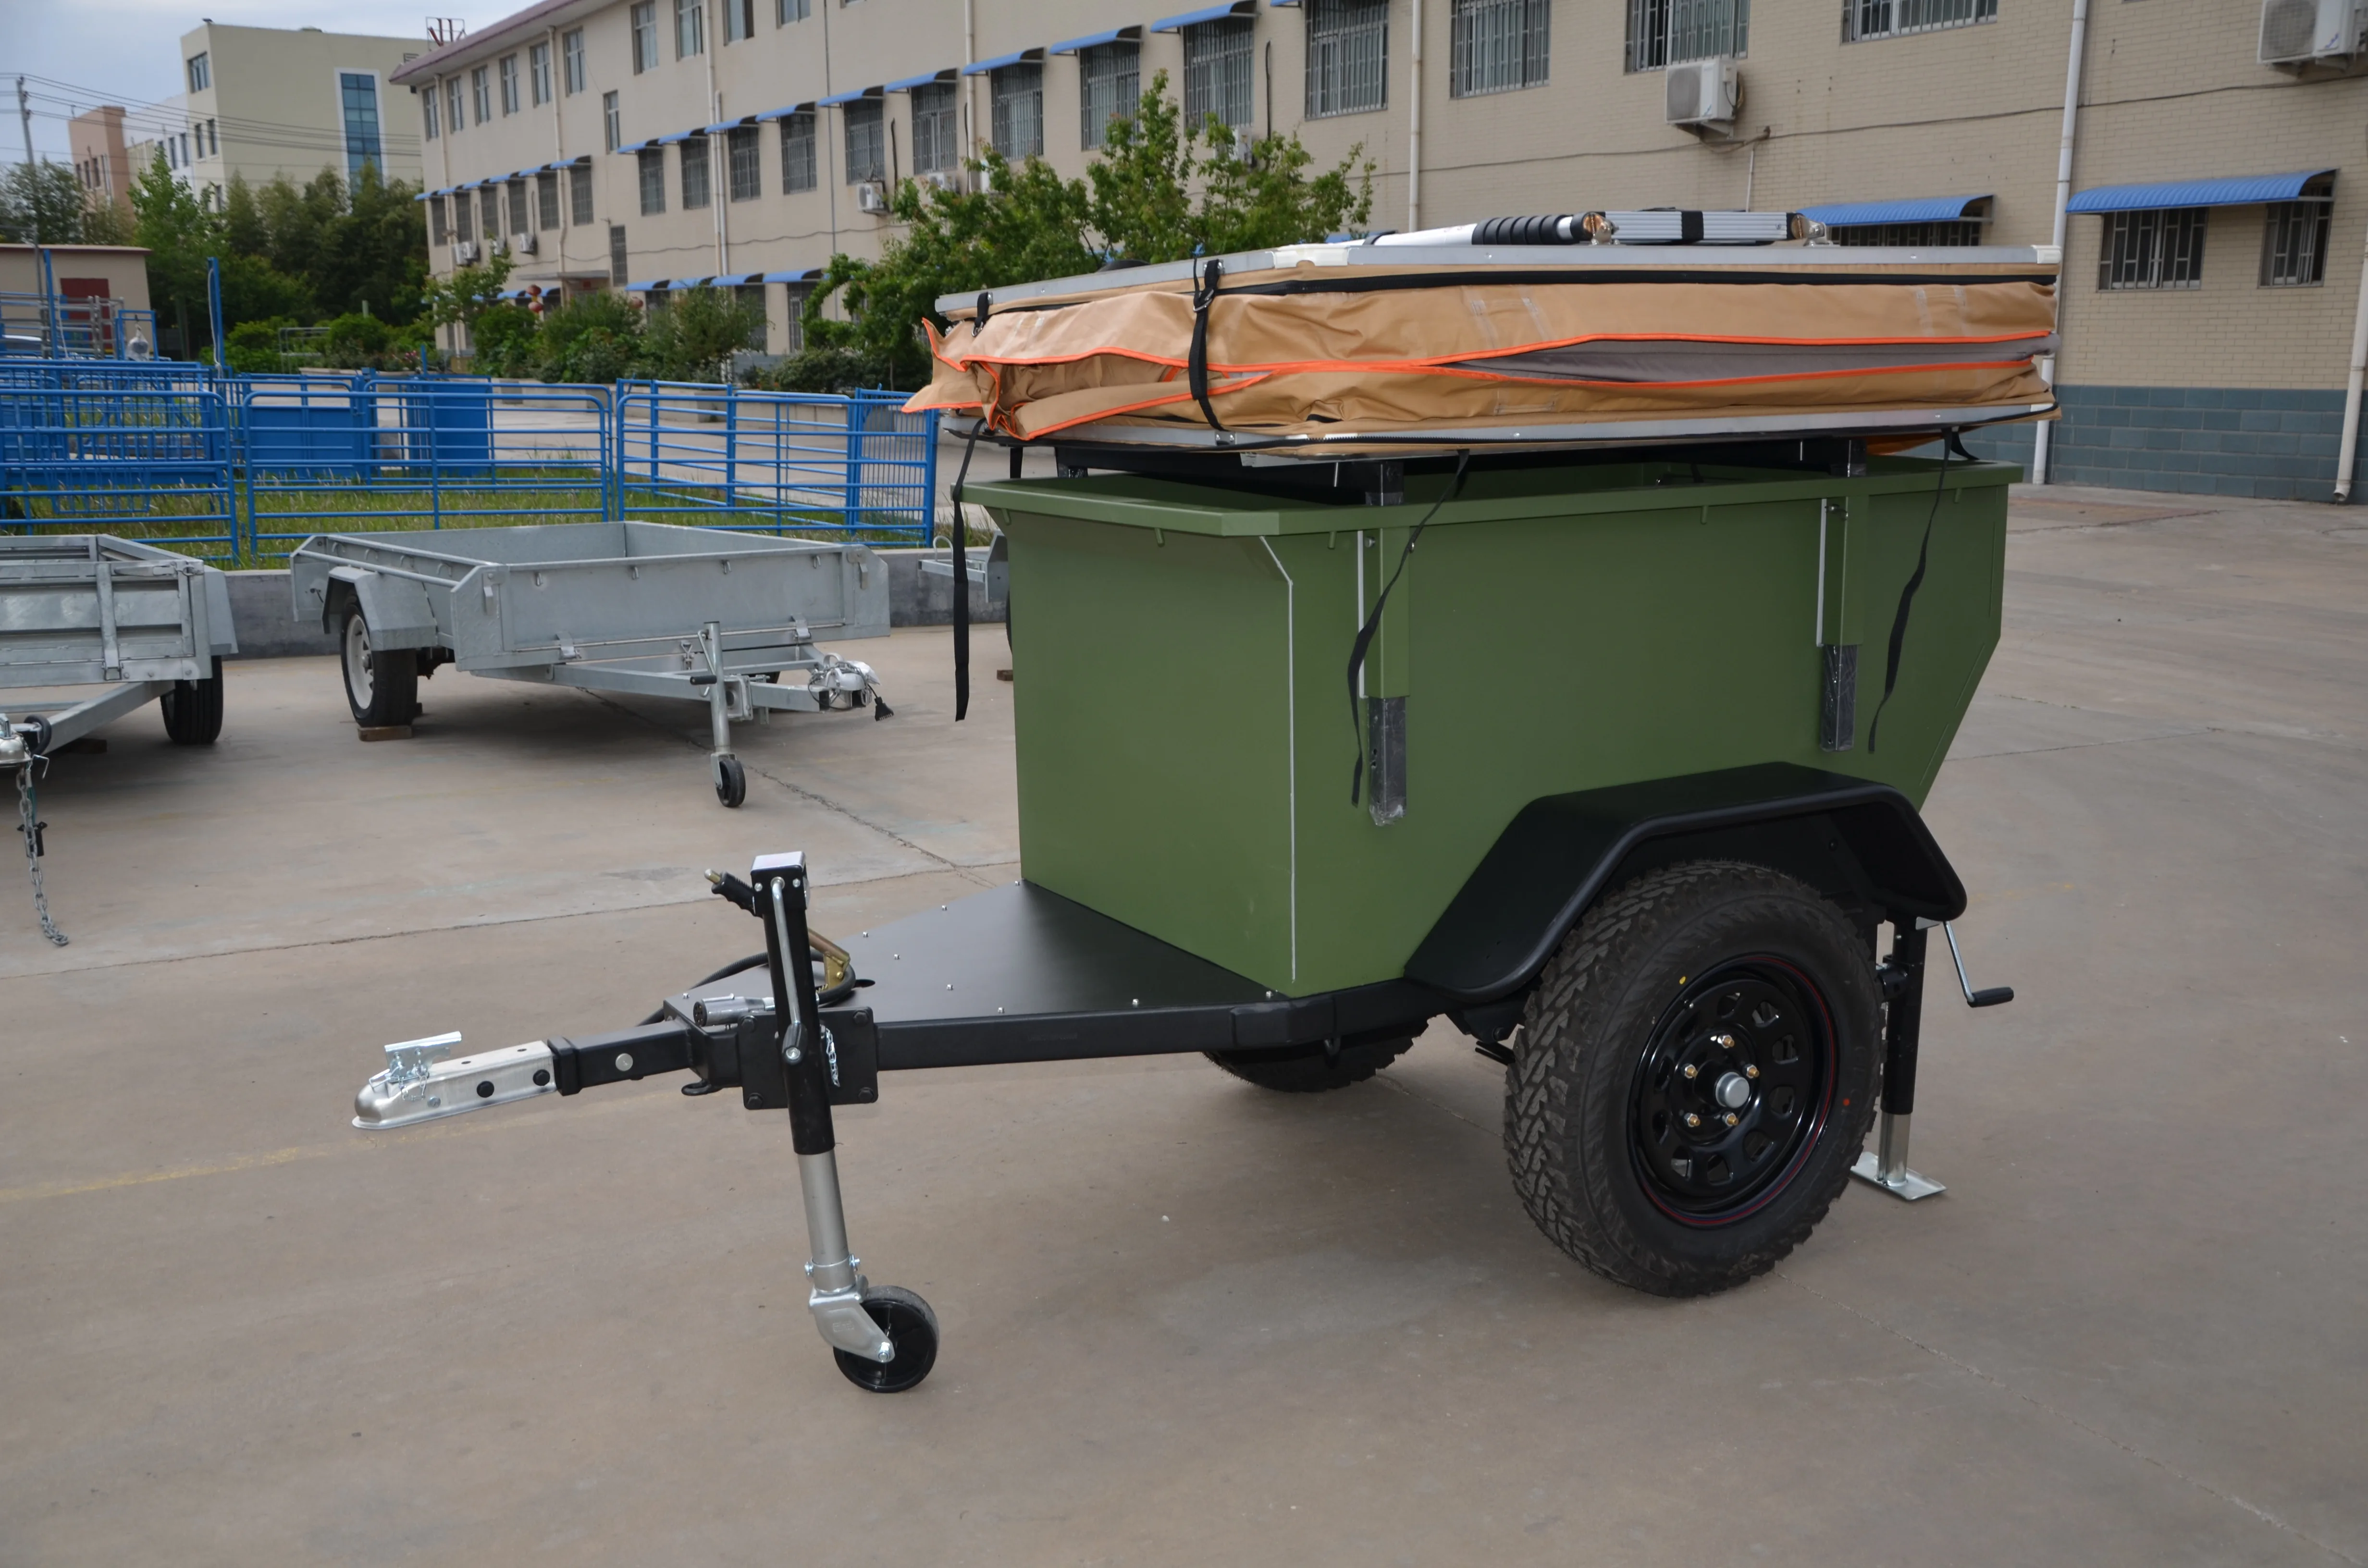 
Luxury Folding Camper Trailer with canvas tent for sale HLT-04 